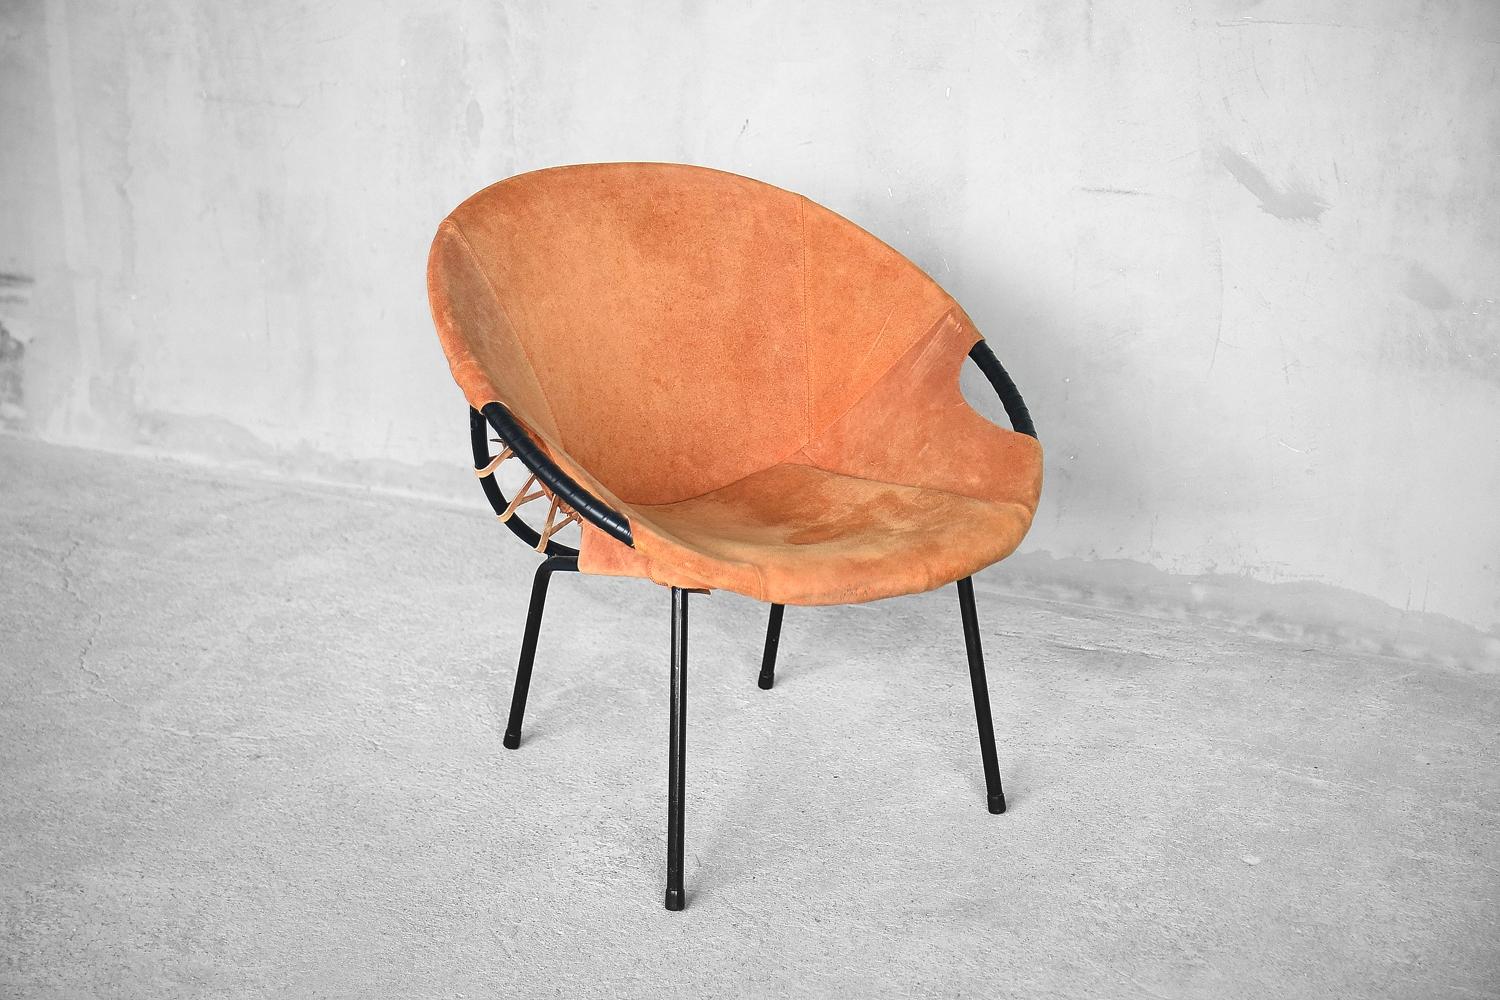 Midcentury Circle Balloon Chair by Lusch Erzeugnis for Lusch & Co., 1960s For Sale 1